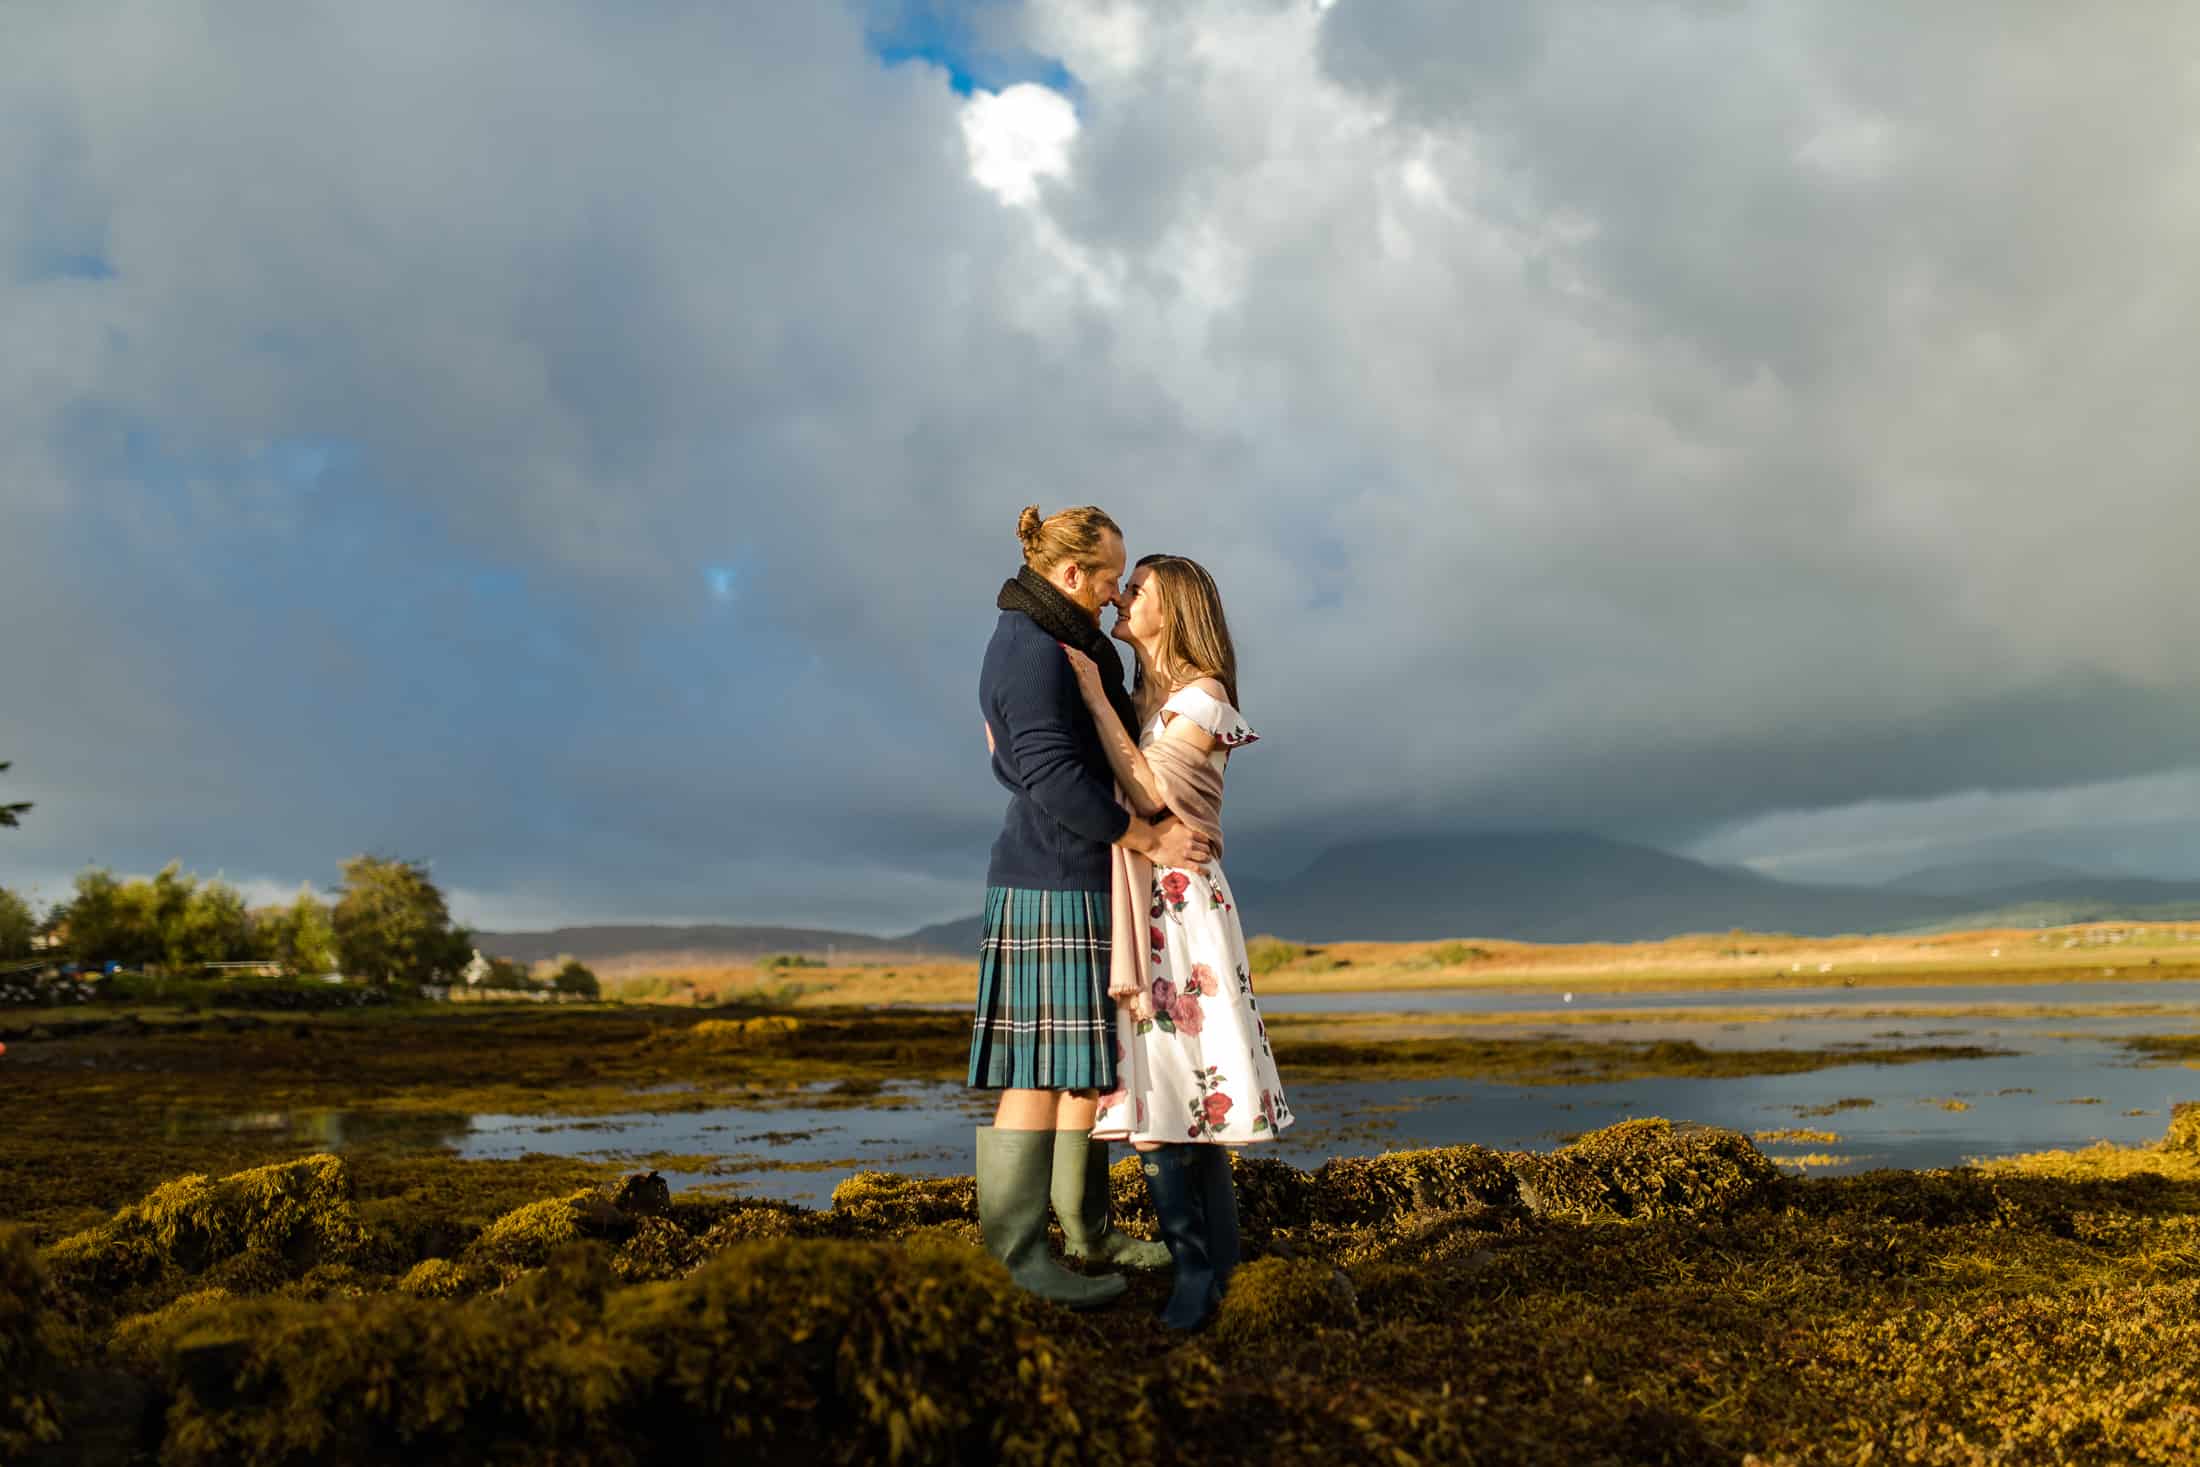 Engagement photoshoot on beach with mountains Isle of skye